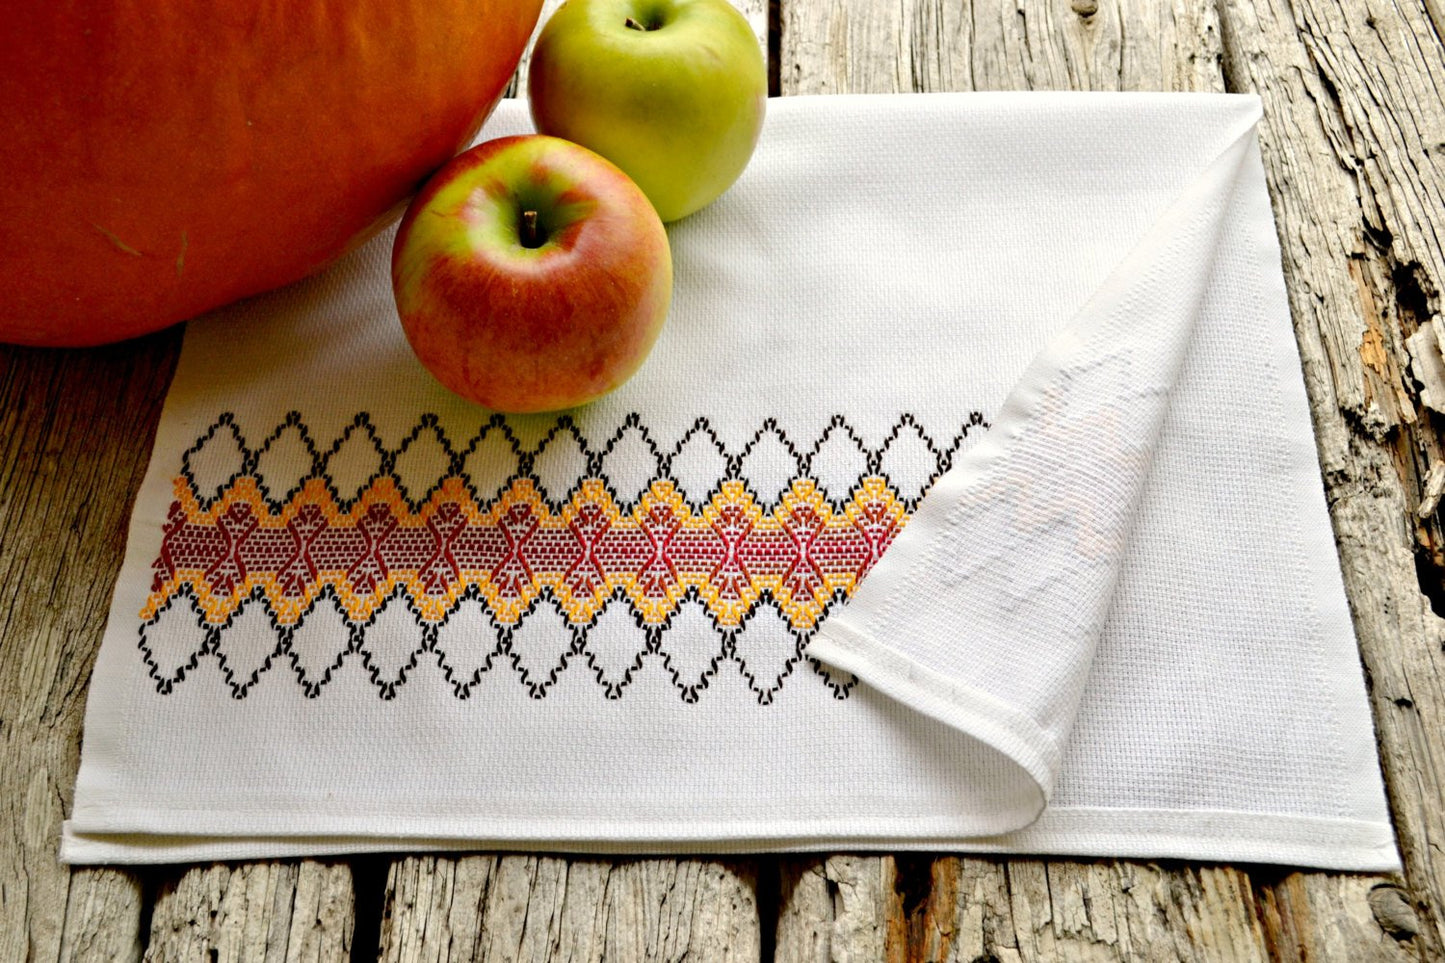 Huckaback tea towel stitched in harvest colors with apples